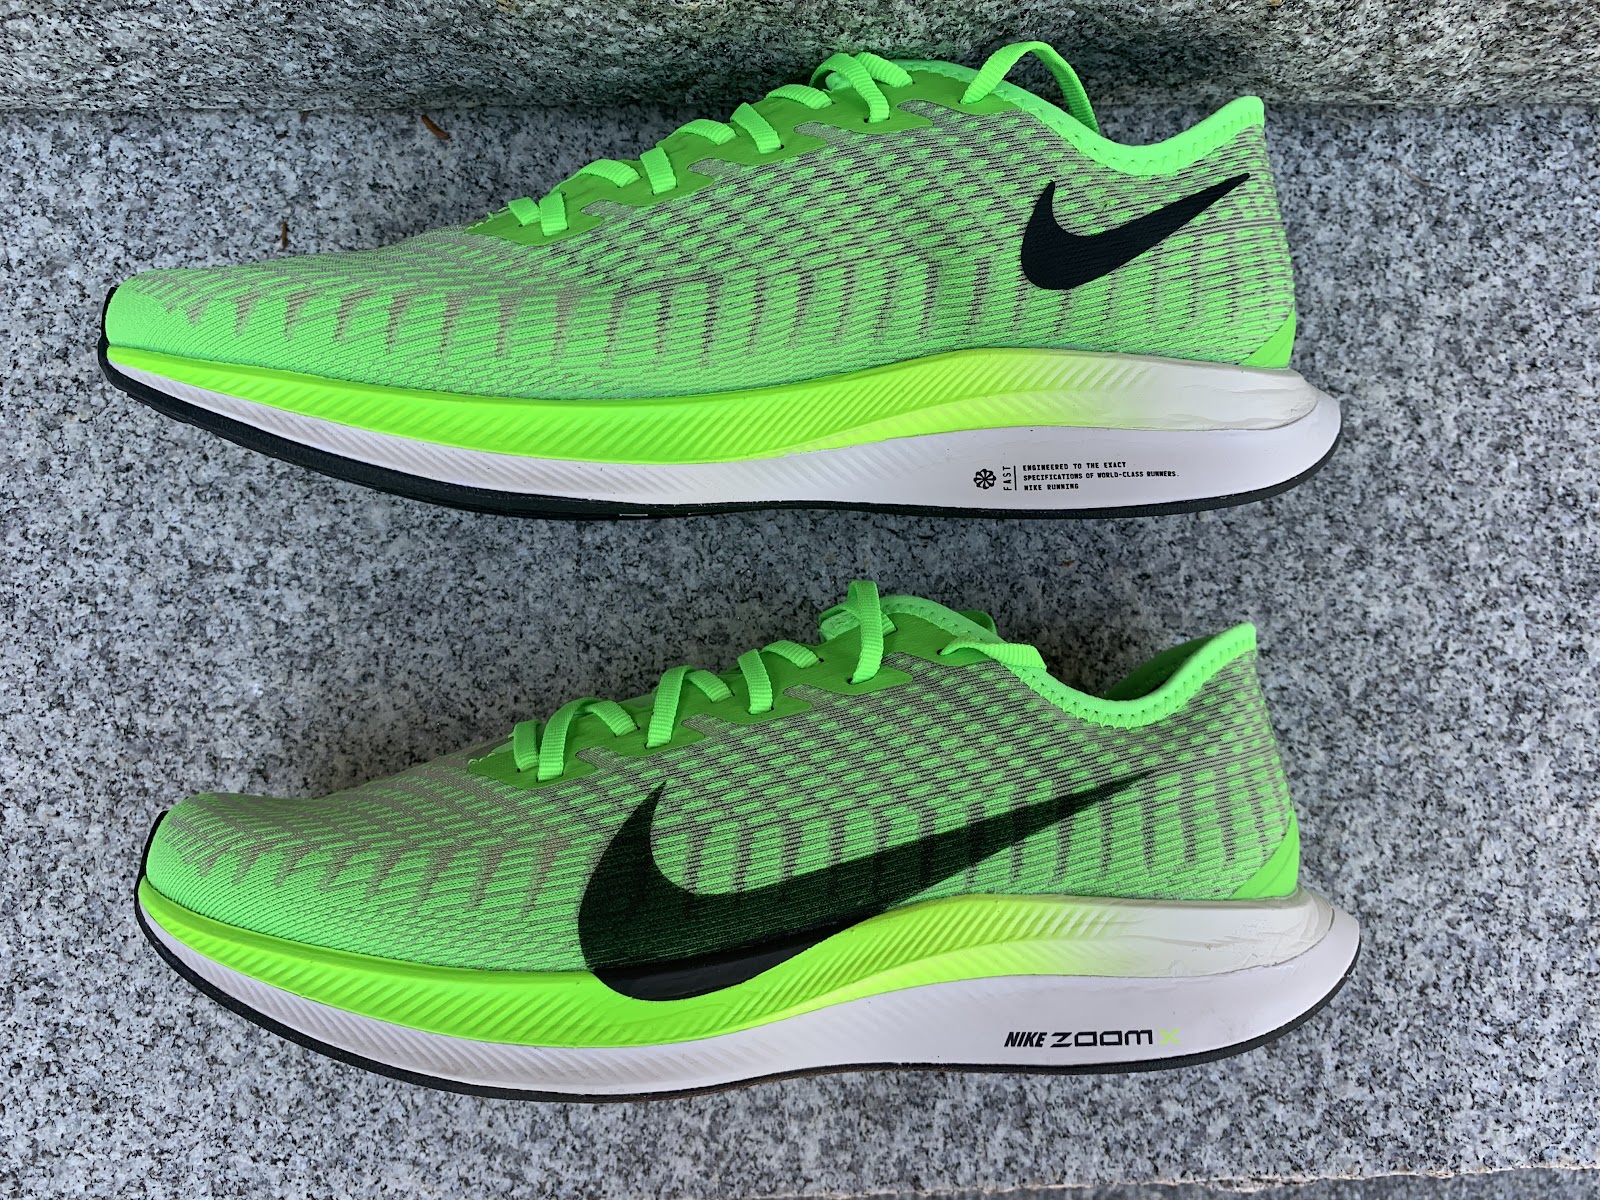 Road Trail Run: NIke Zoom Pegasus 36 Turbo Review: More For Real Turbo and a Superb Upper